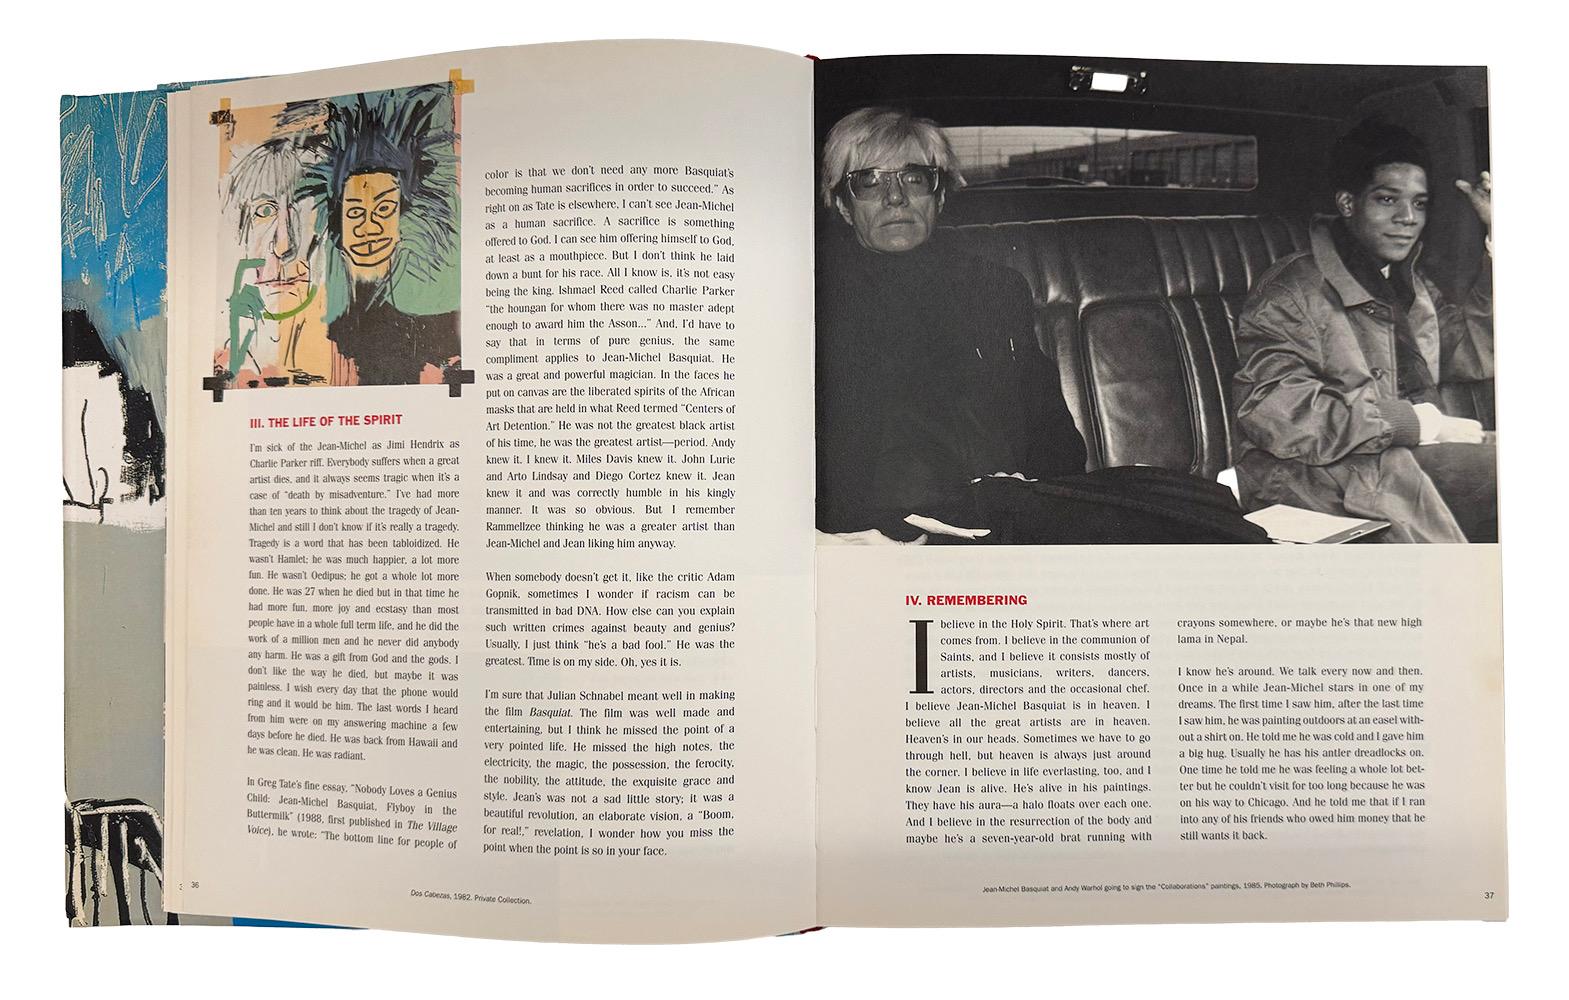 Jean-Michel Basquiat Tony Shafrazi Gallery 1999:
 Rare limited edition 1999 hardcover Basquiat monograph published on the occasion of a key posthumous Basquiat exhibition held at Tony Shafrazi Gallery New York. The book is exquisitely printed &